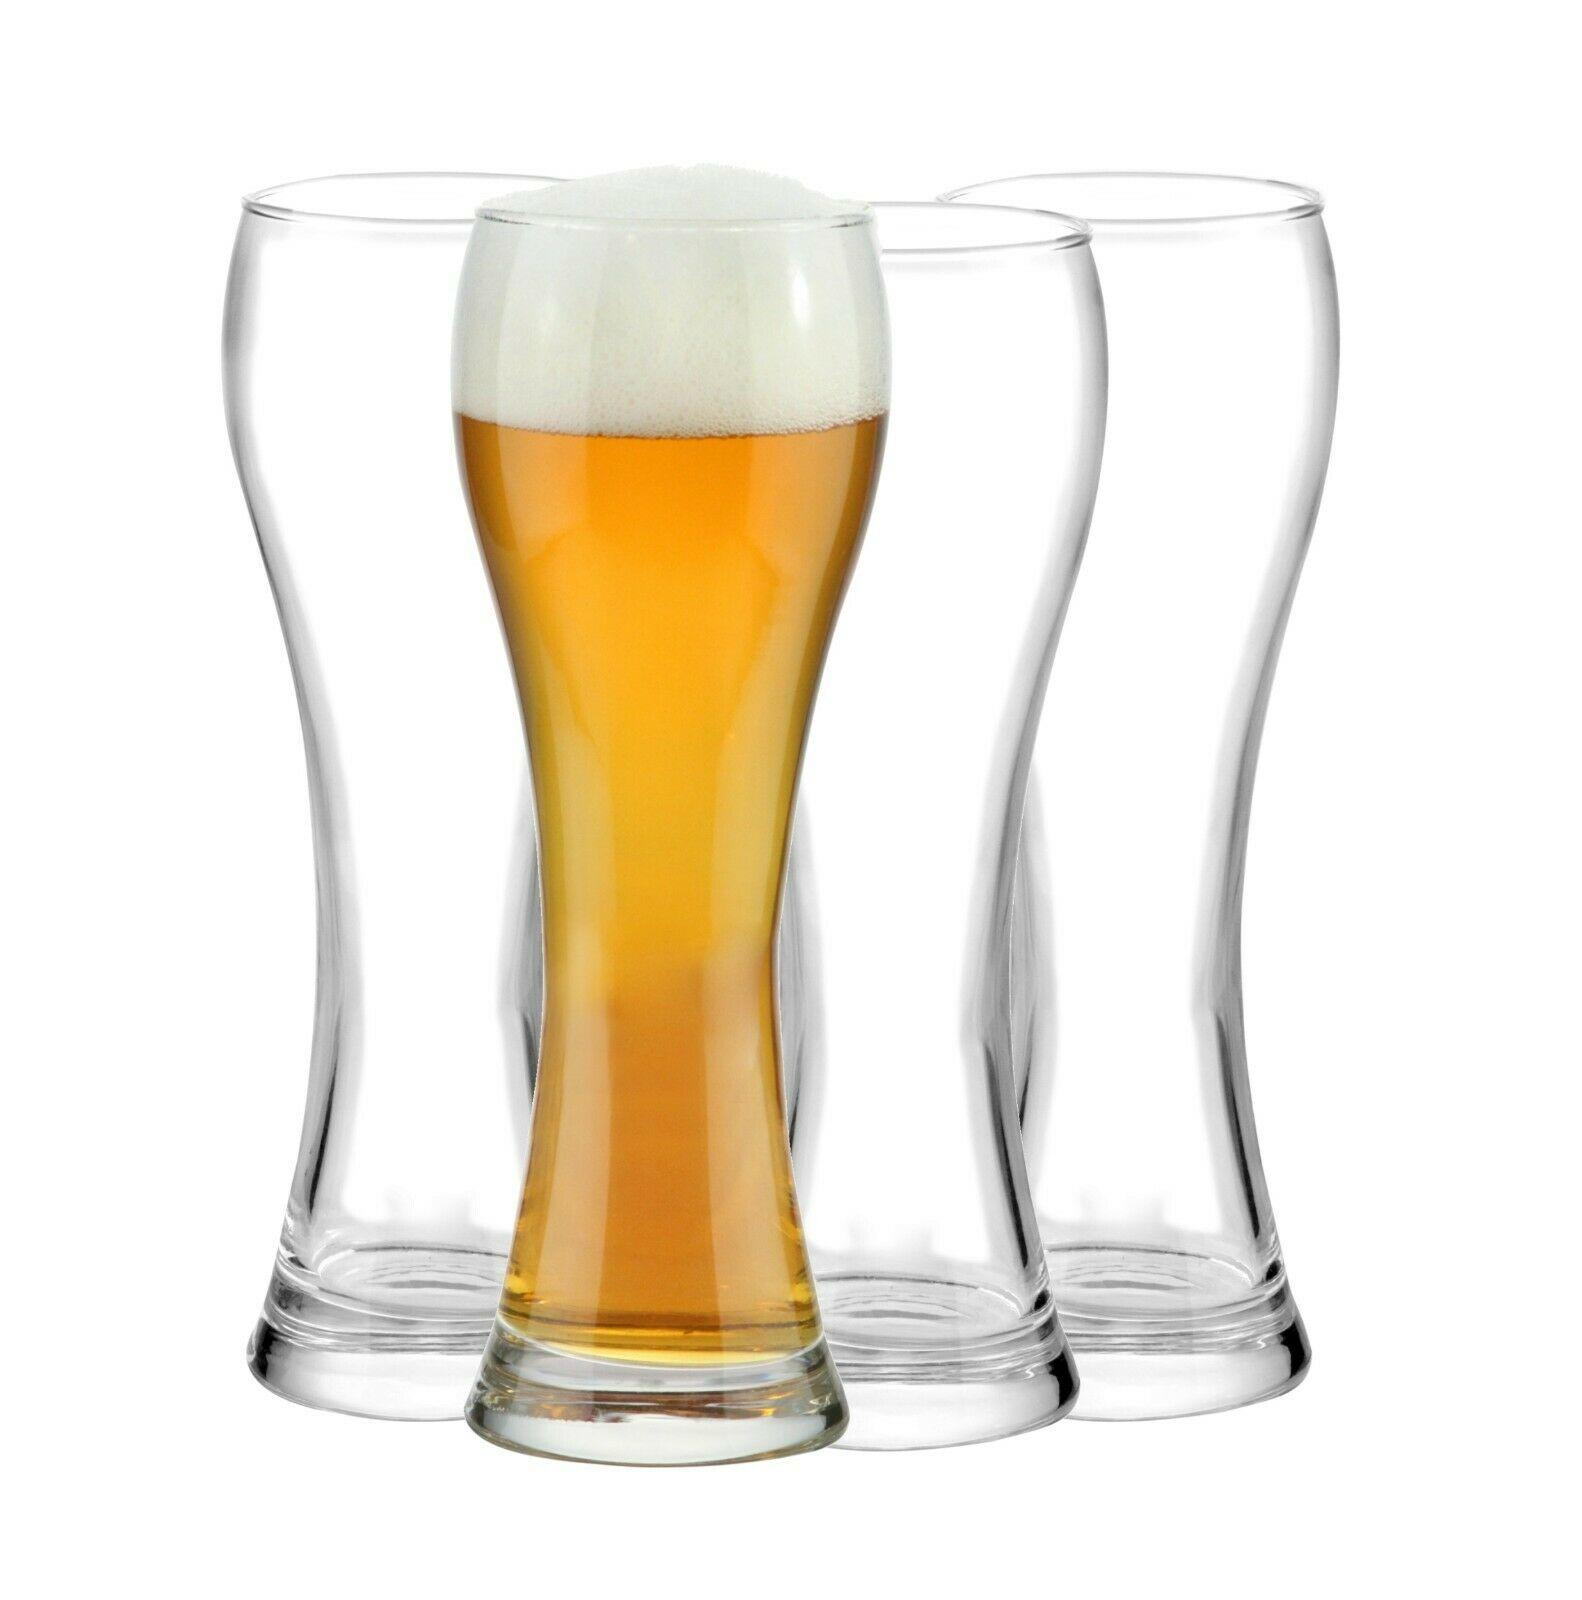 Imperial Beer Glass - Set of 6